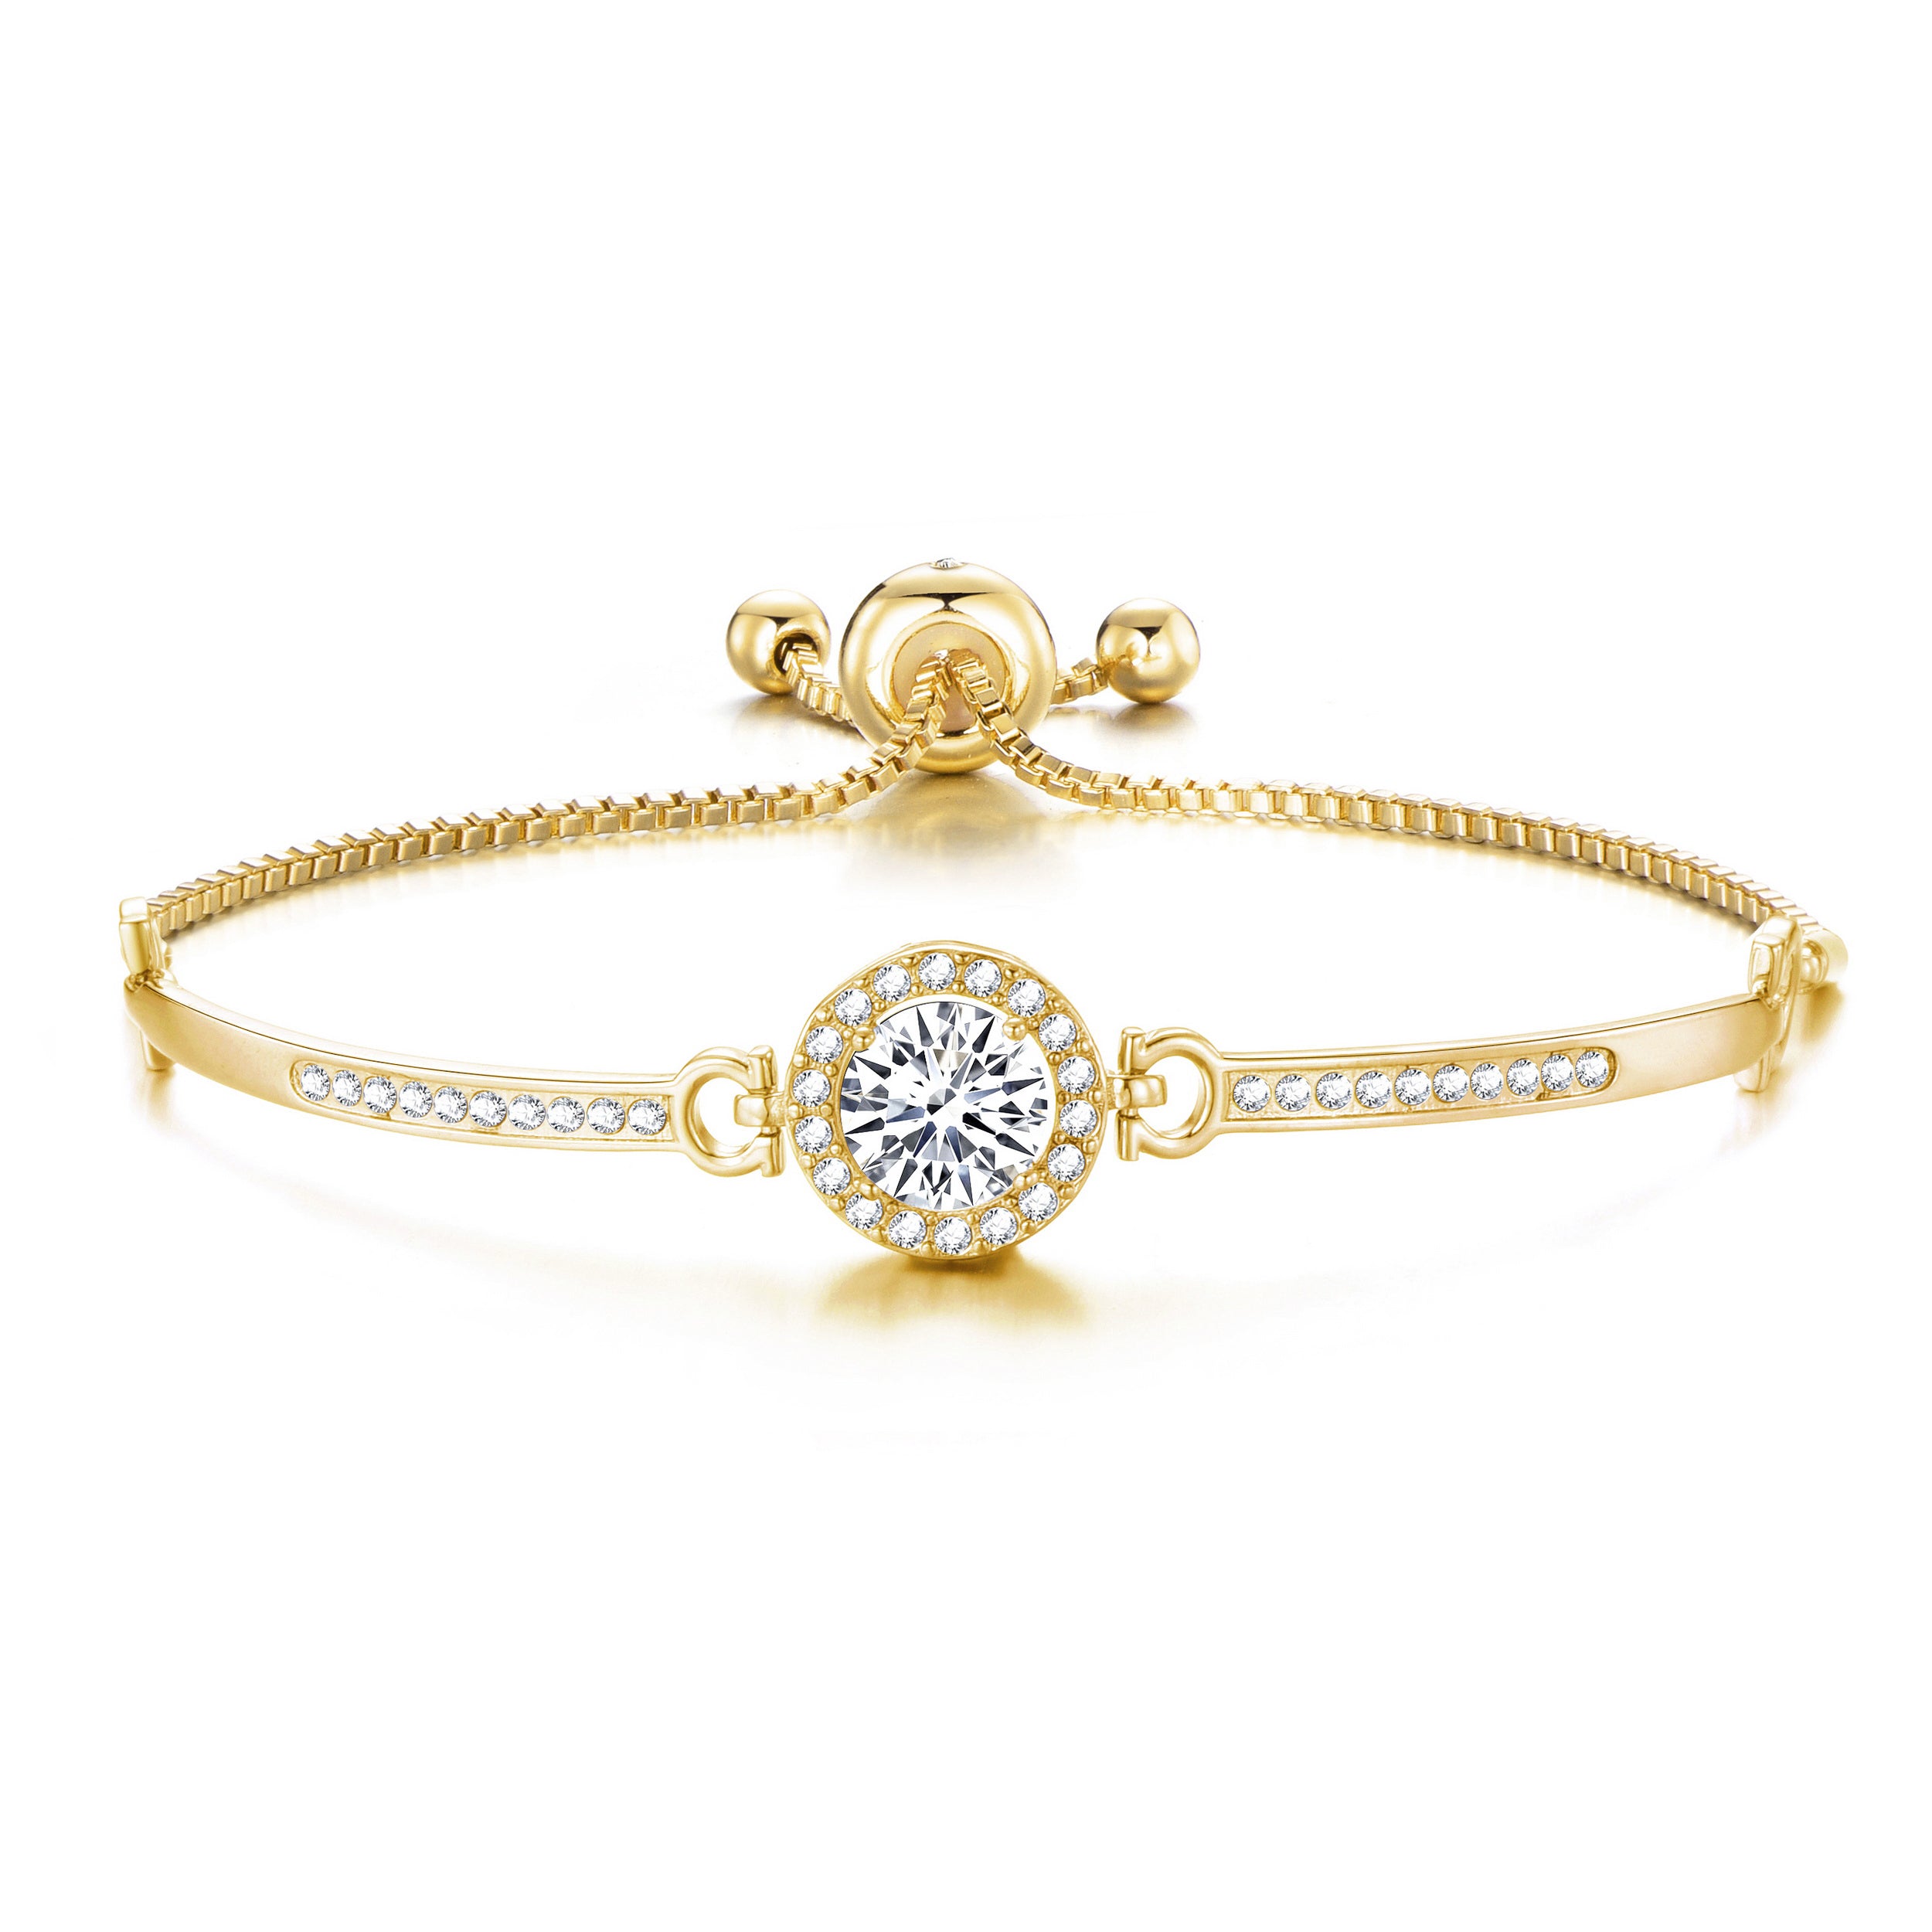 Gold Plated Halo Friendship Bracelet Created with Zircondia® Crystals by Philip Jones Jewellery